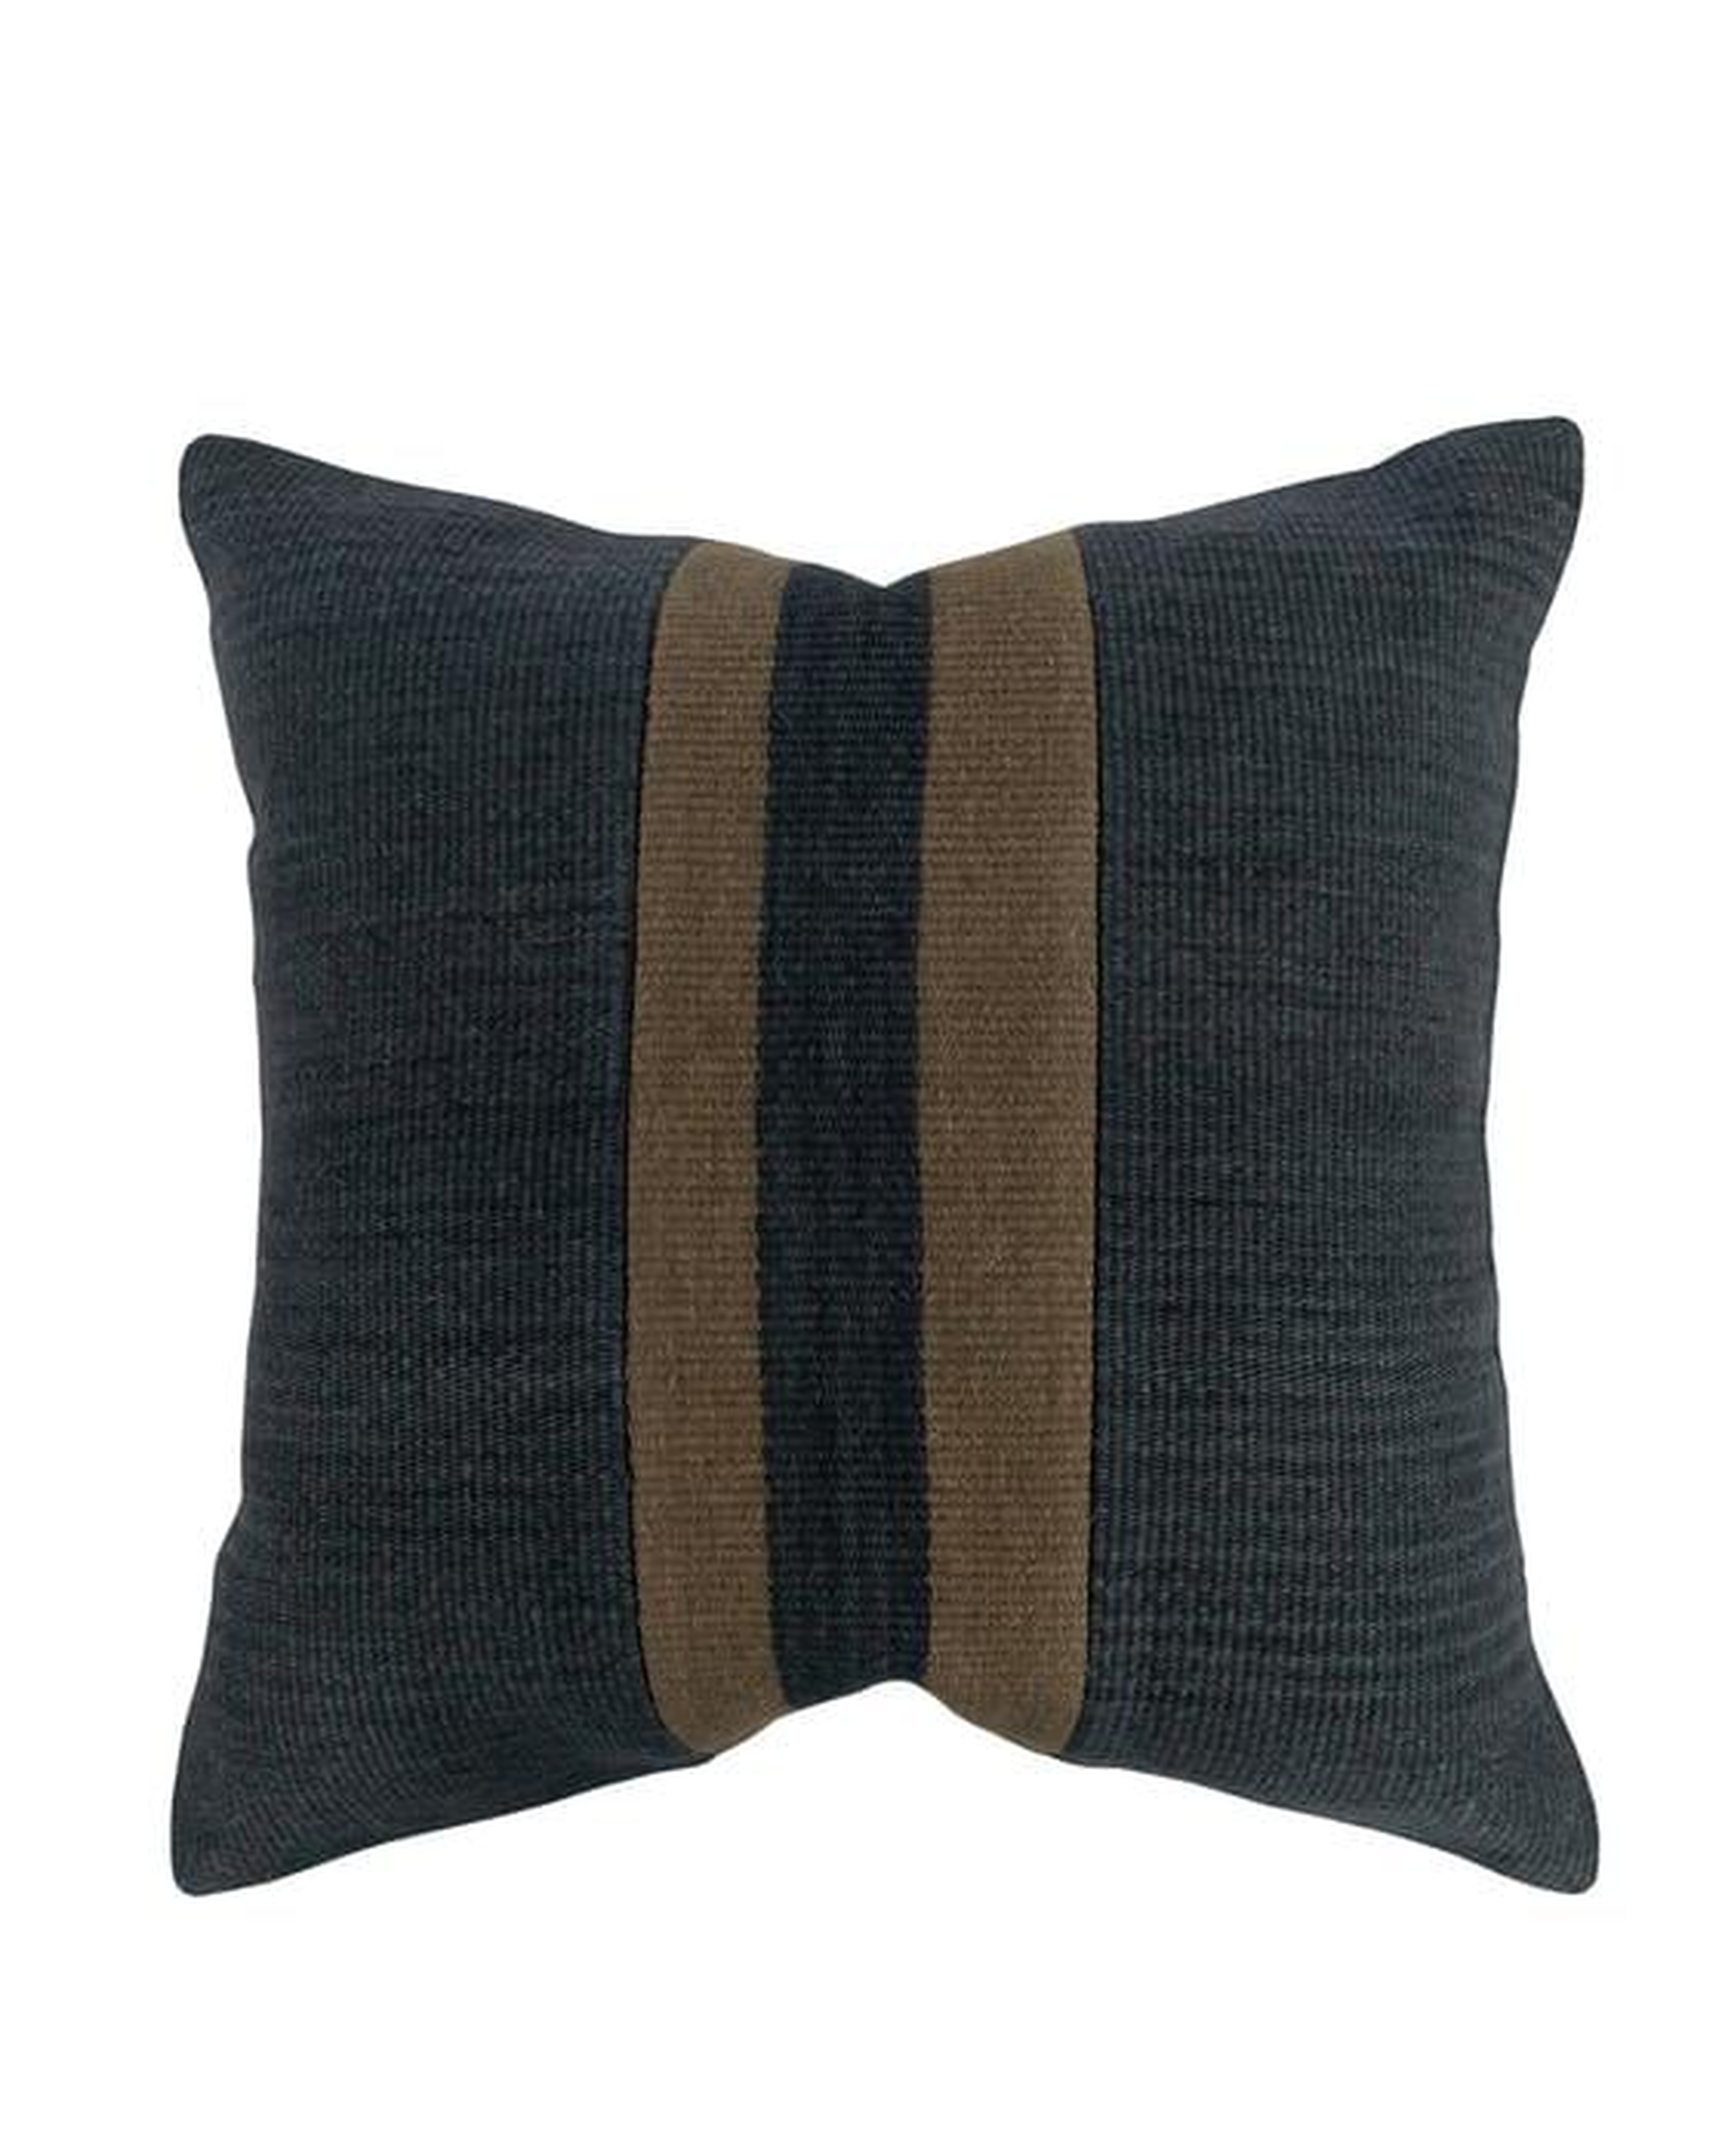 Cohen Striped Pillow Cover - McGee & Co.